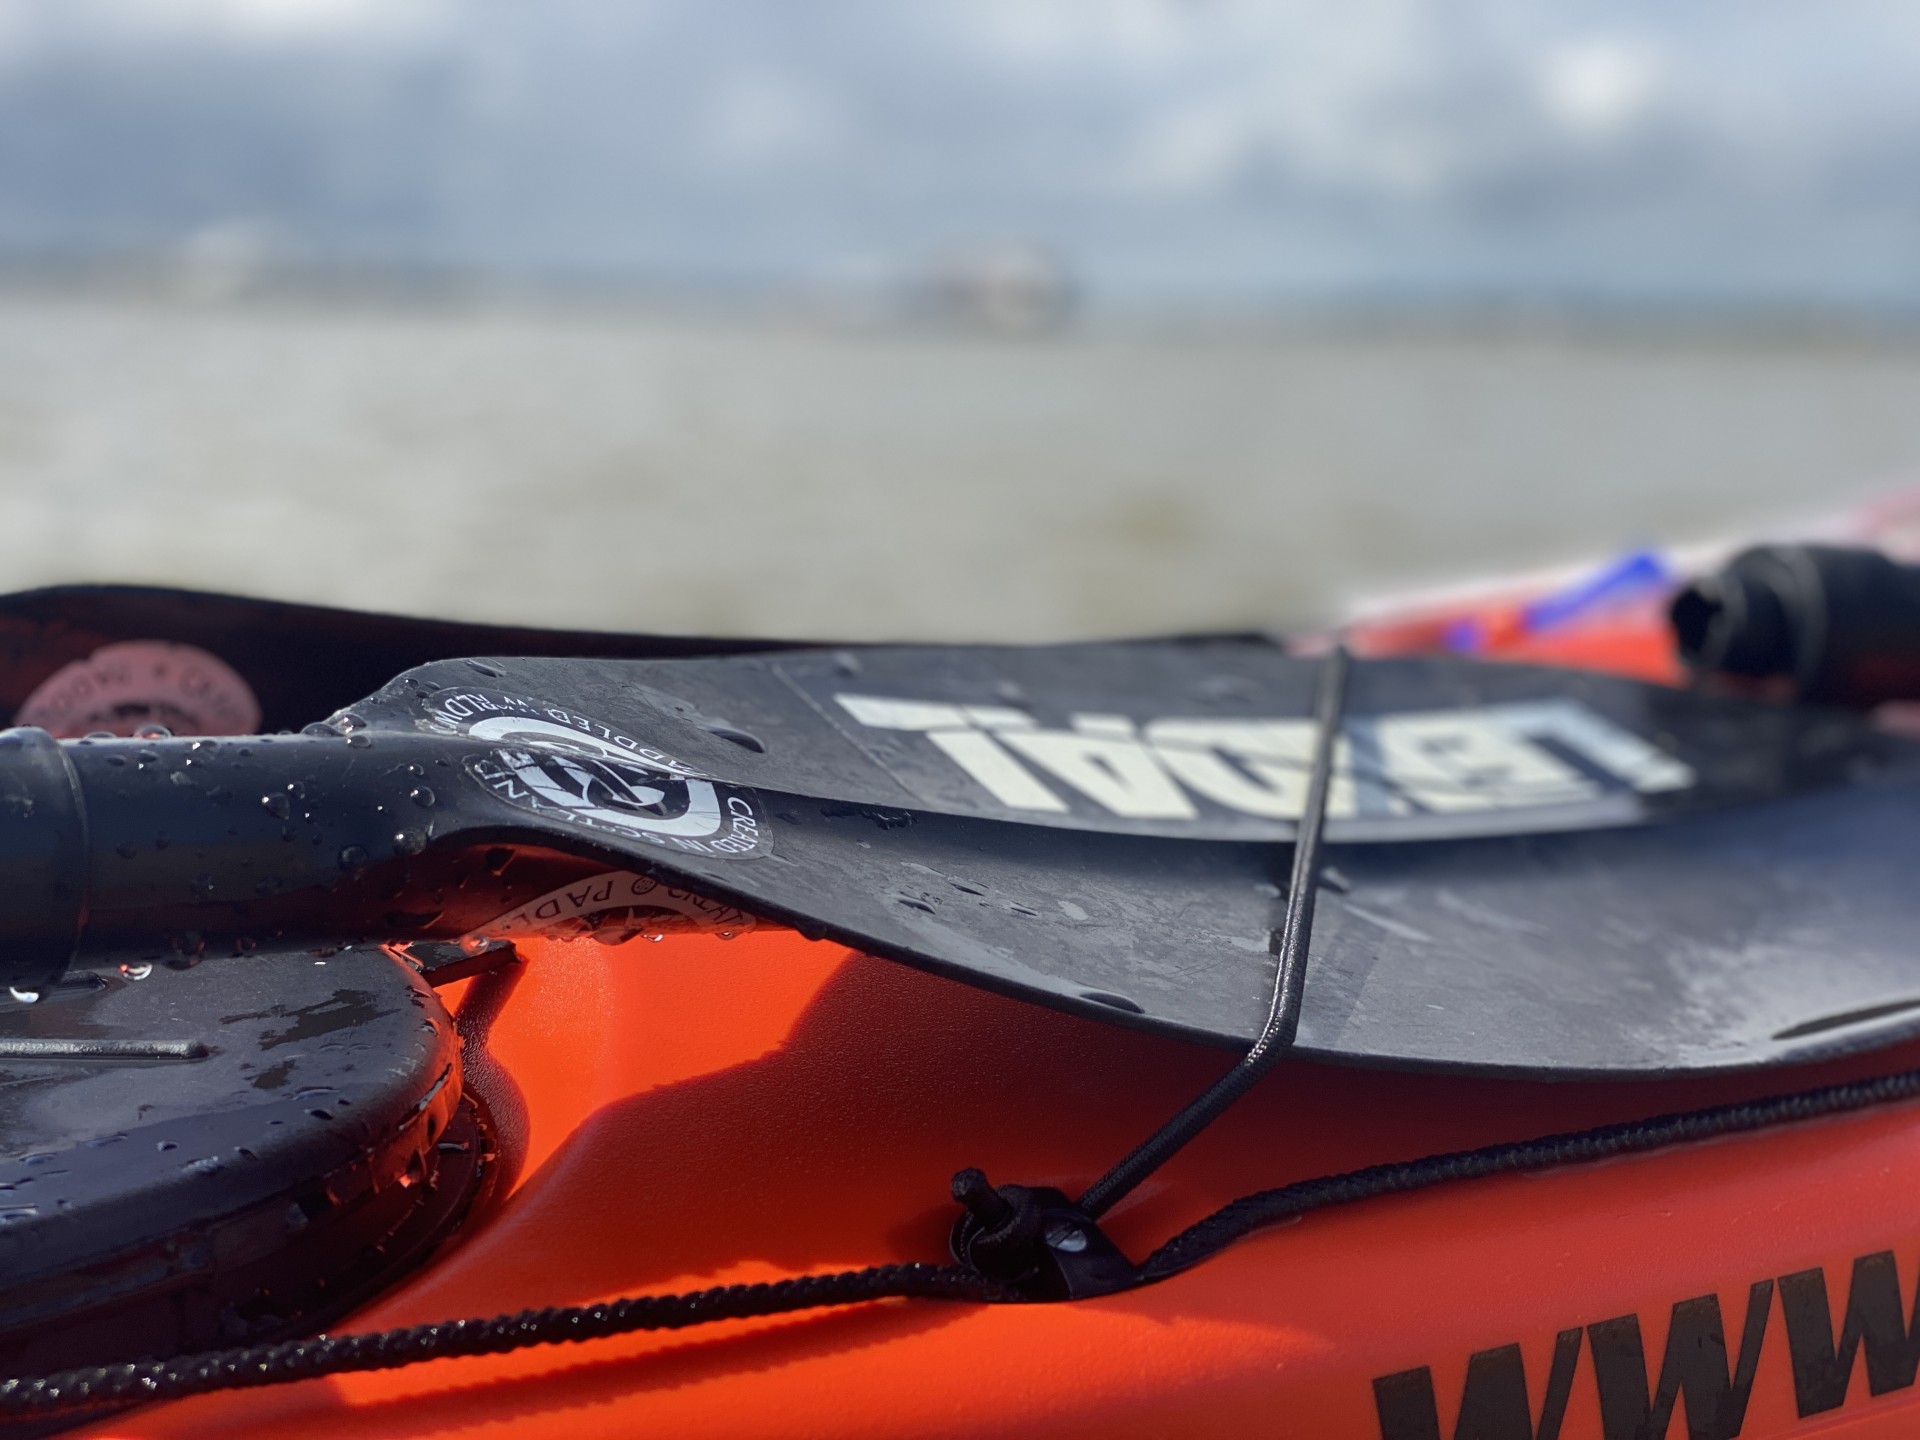 Lendal paddles on the deck of a sea kayak.